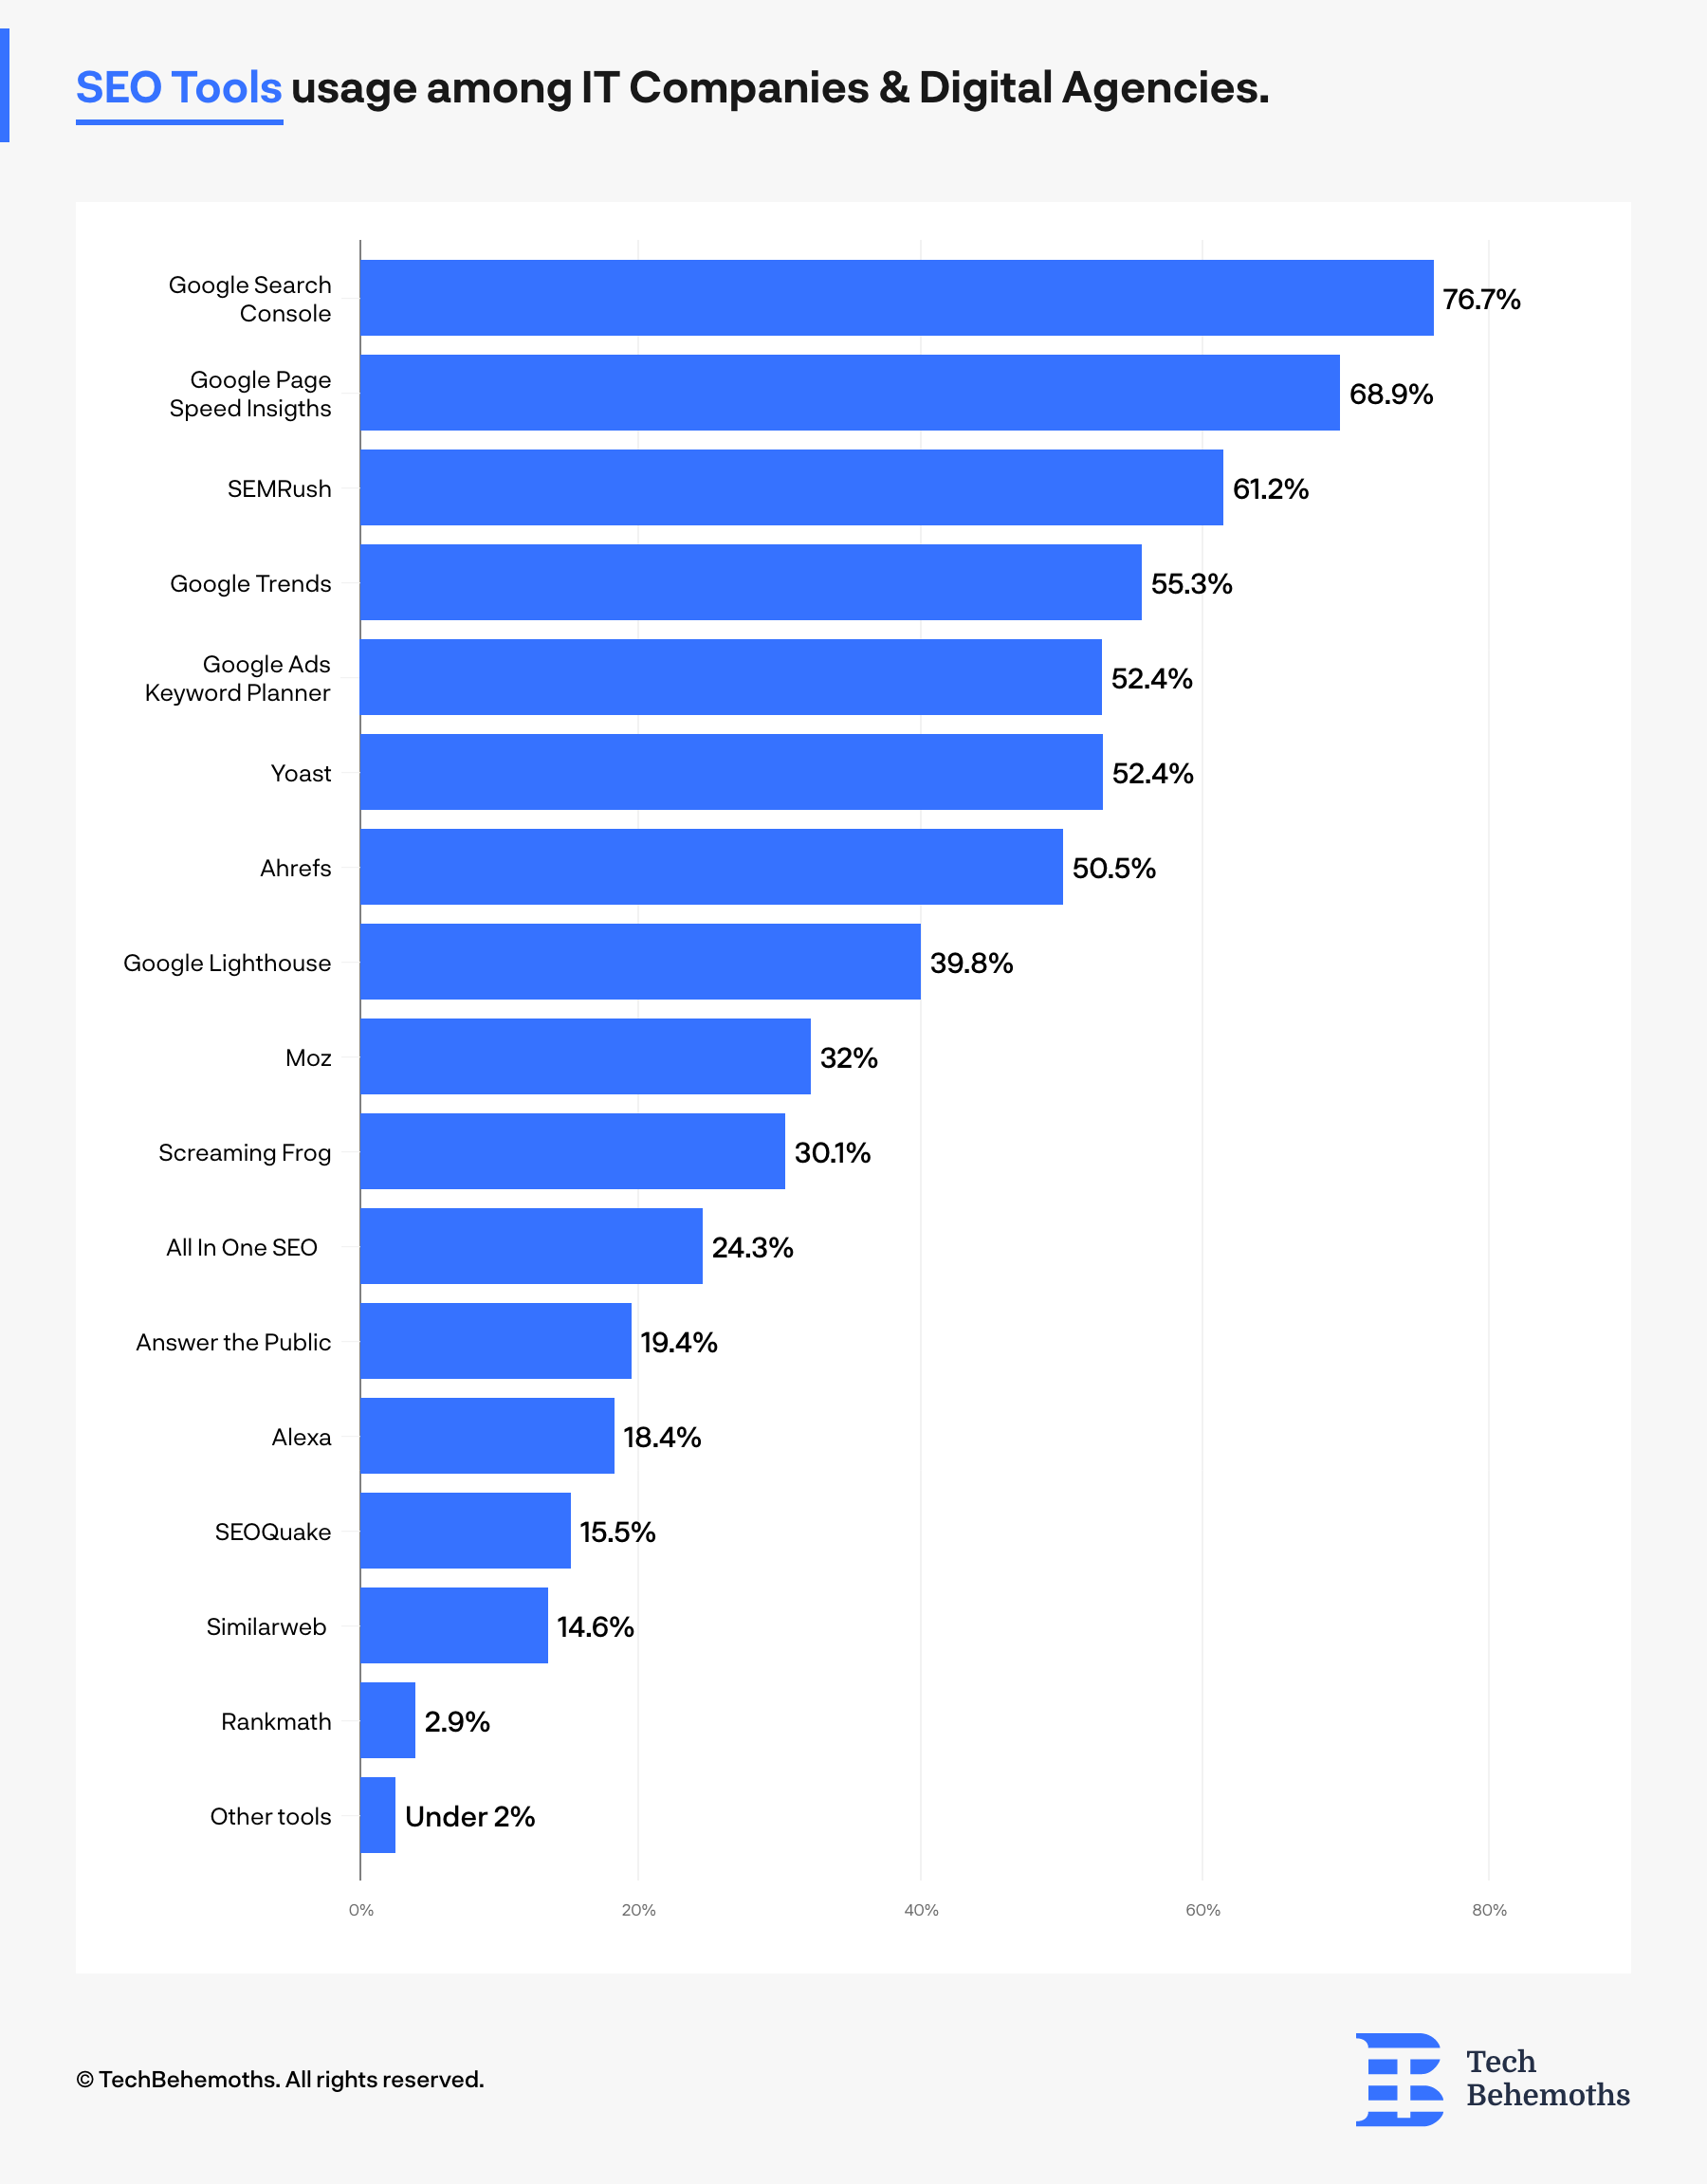 76.7% of all IT companies use Google Search Console for SEO tasks